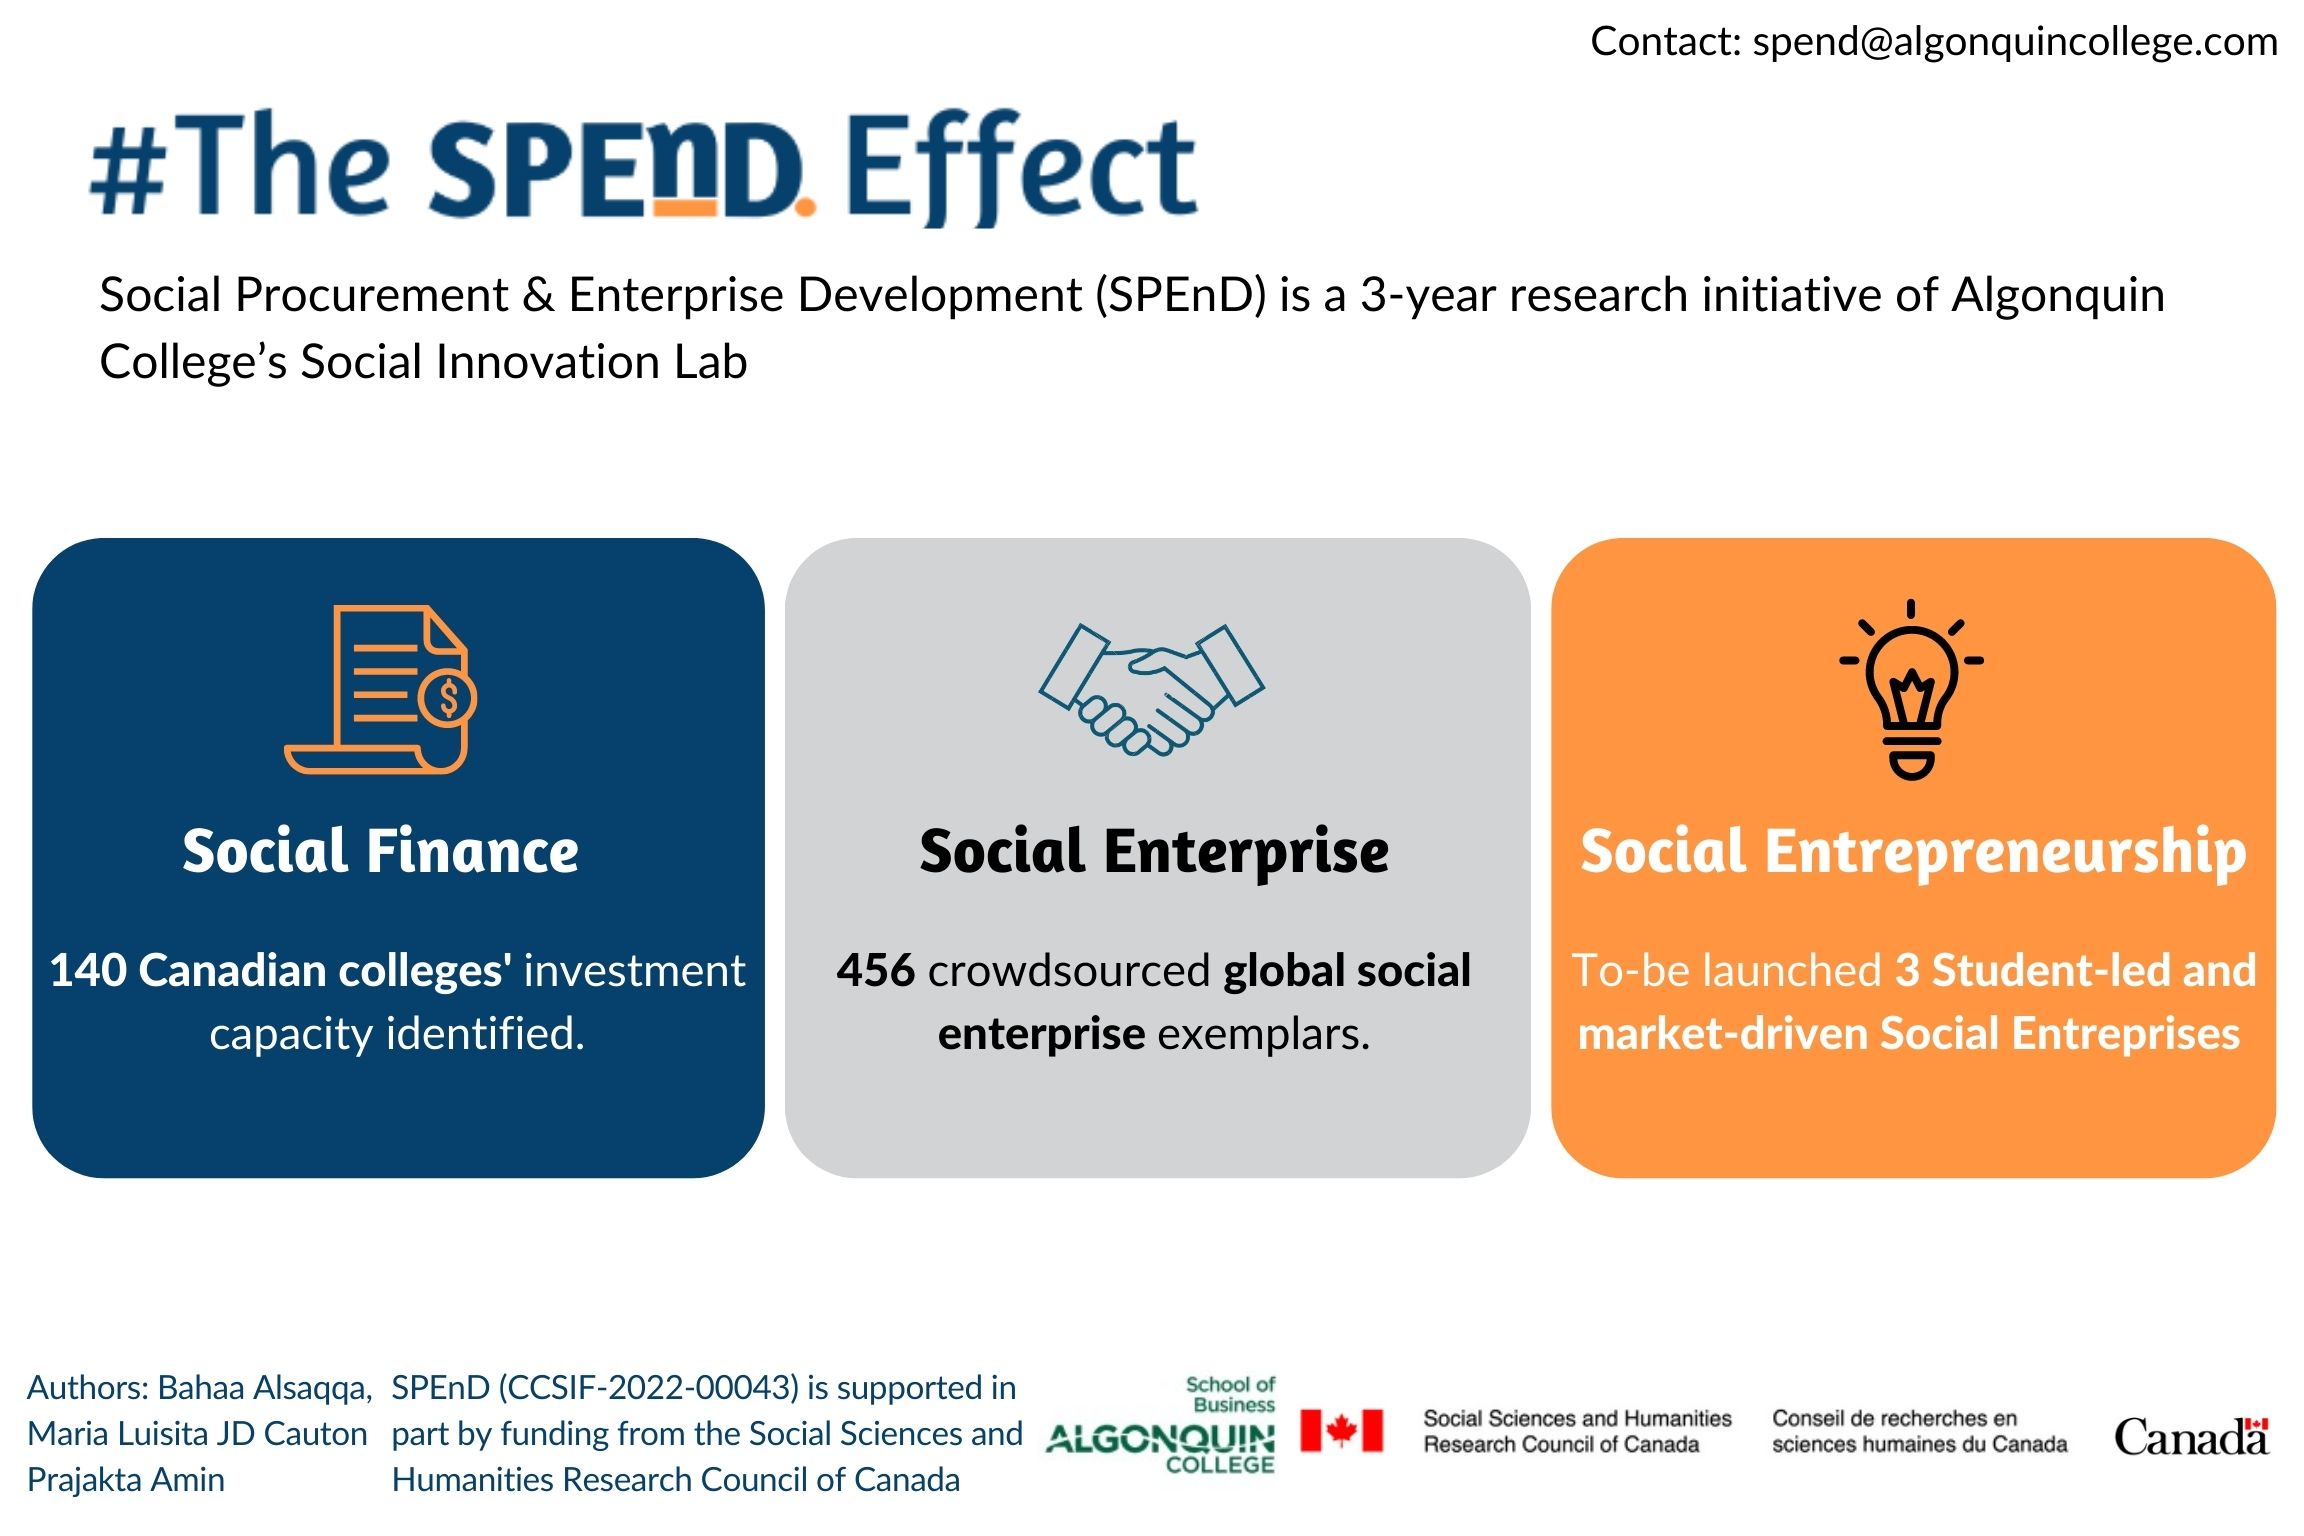 SPEnD is a 3-year research initiative by Algonquin College's Social Innovation Lab, focusing on Canada's college sector's capacity for social procurement and social finance to promote community wealth building through market-driven social enterprises.